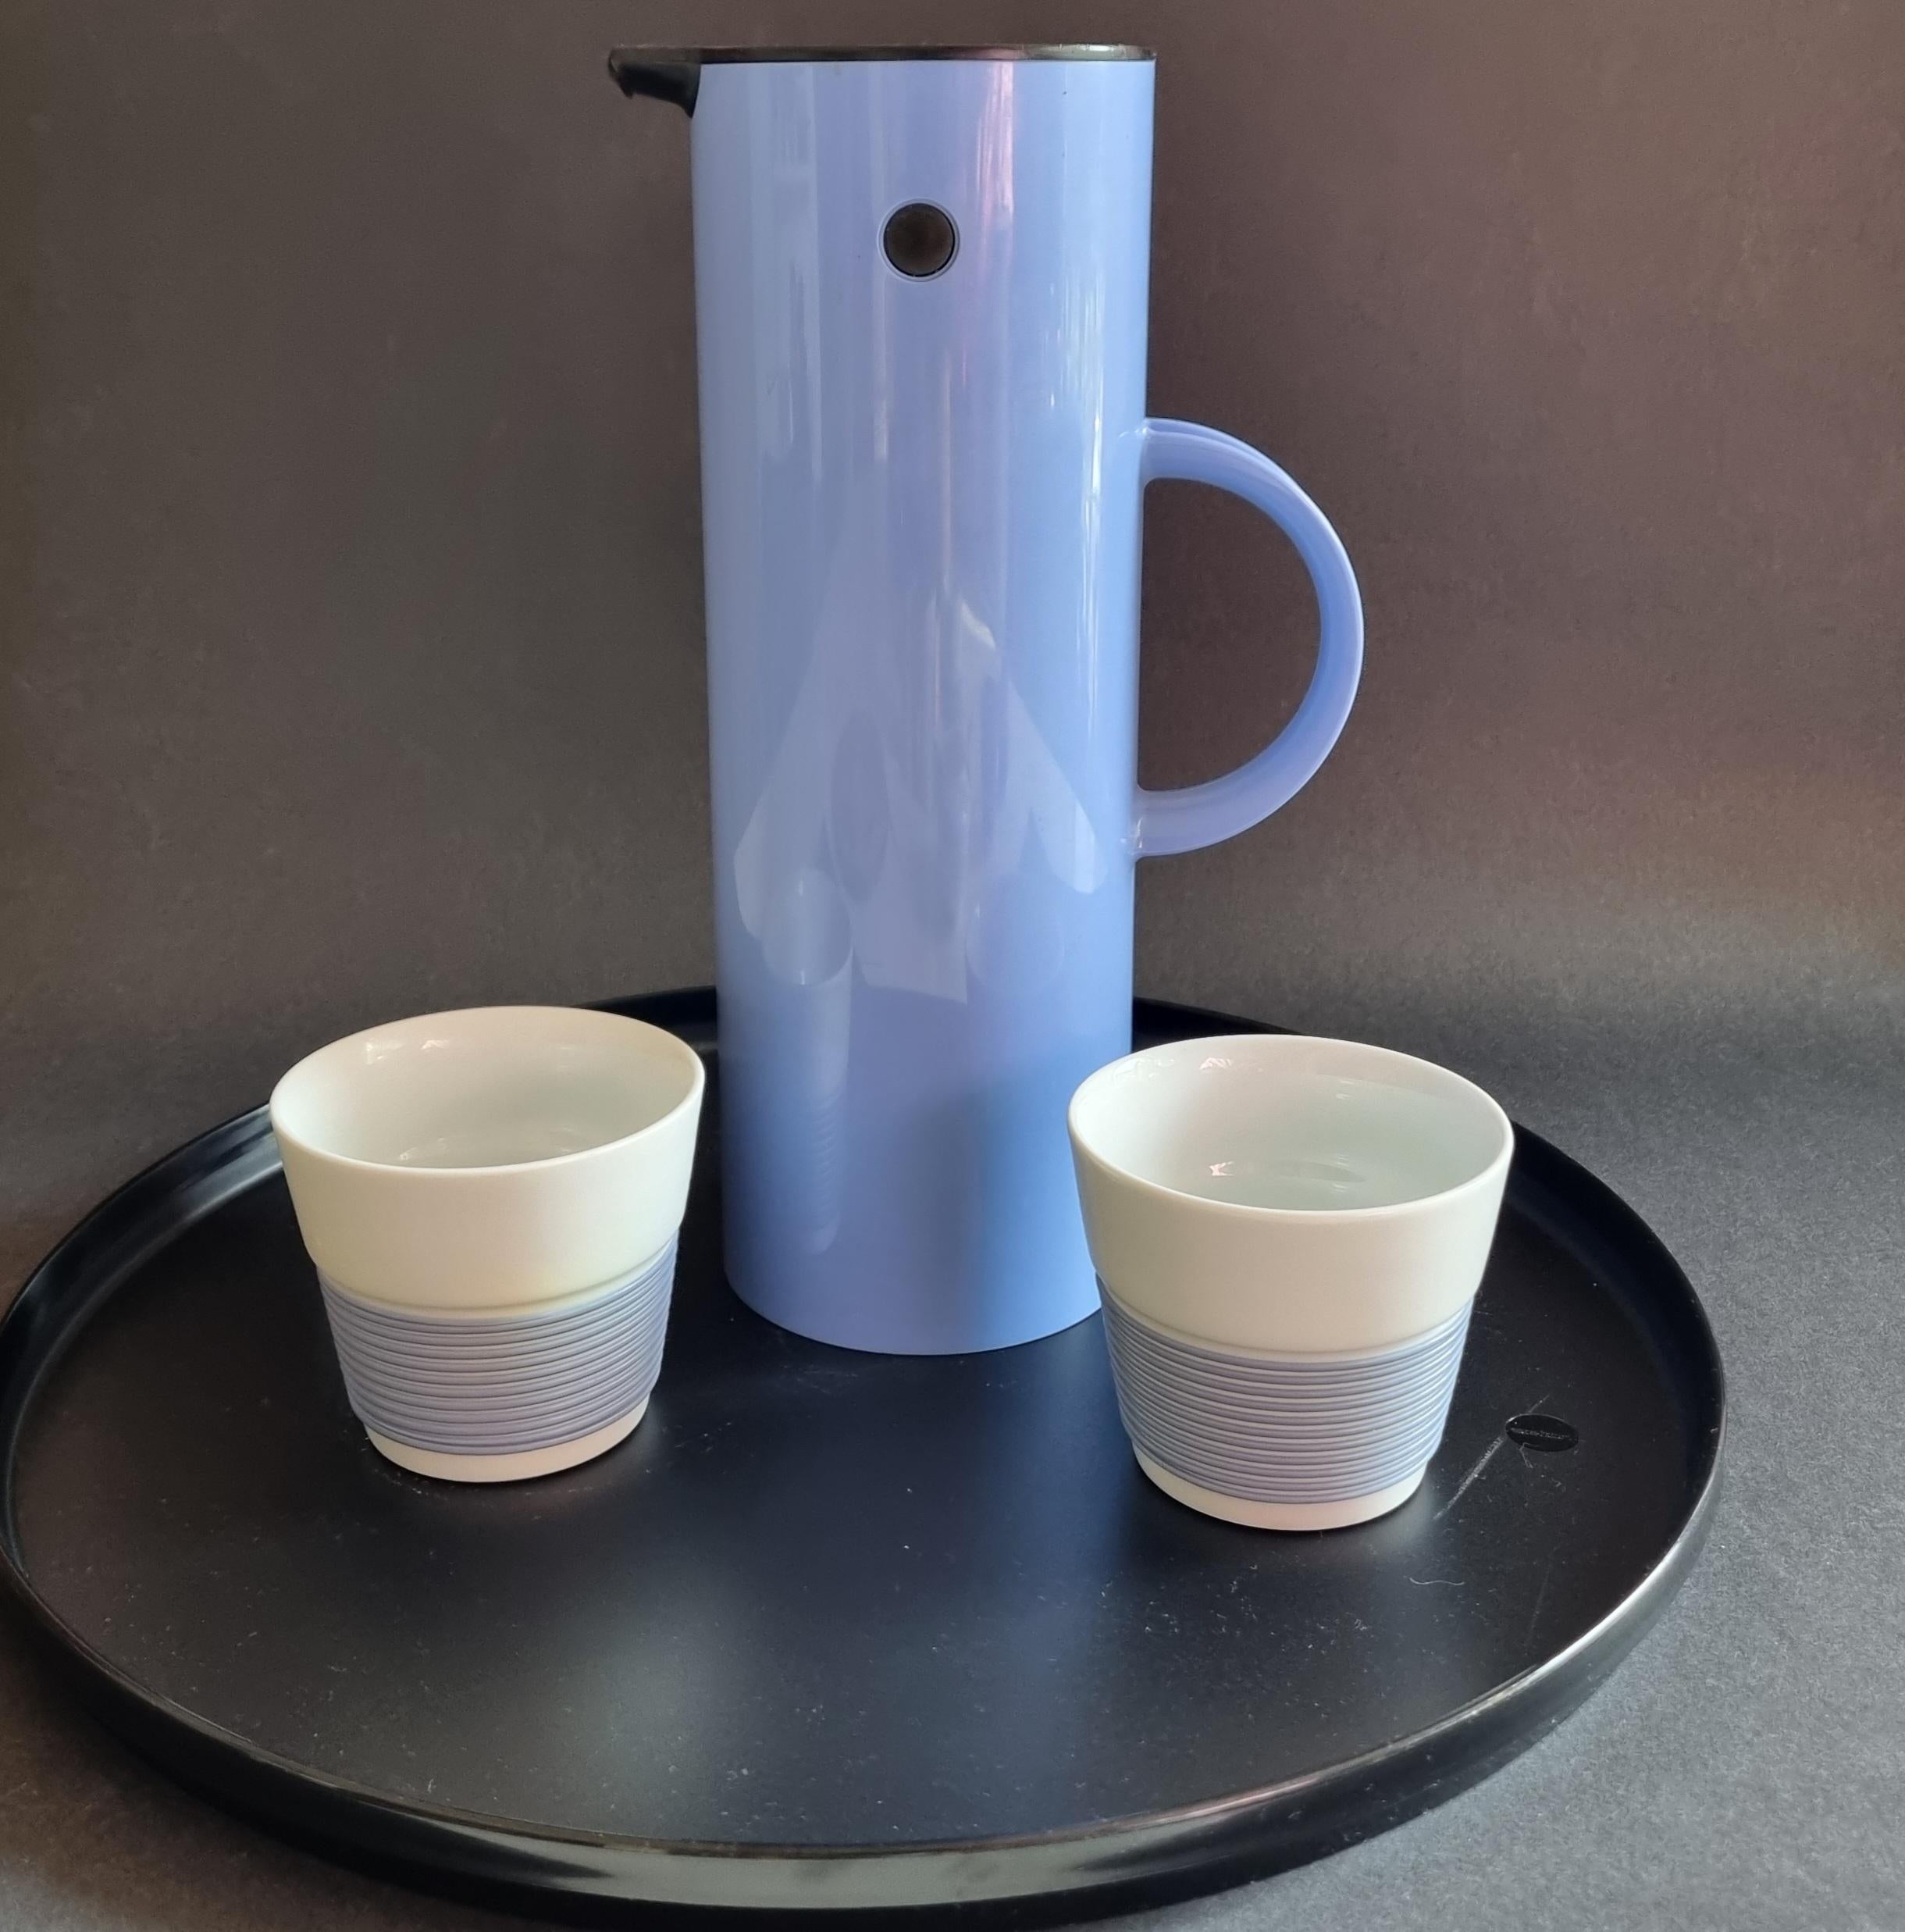 We have Stelton's vacuum jugs in elegant design and different colours. The thermos keep your beverages hot or cold for hours and are perfect for coffee, iced coffee, tea, or cocoa and are an